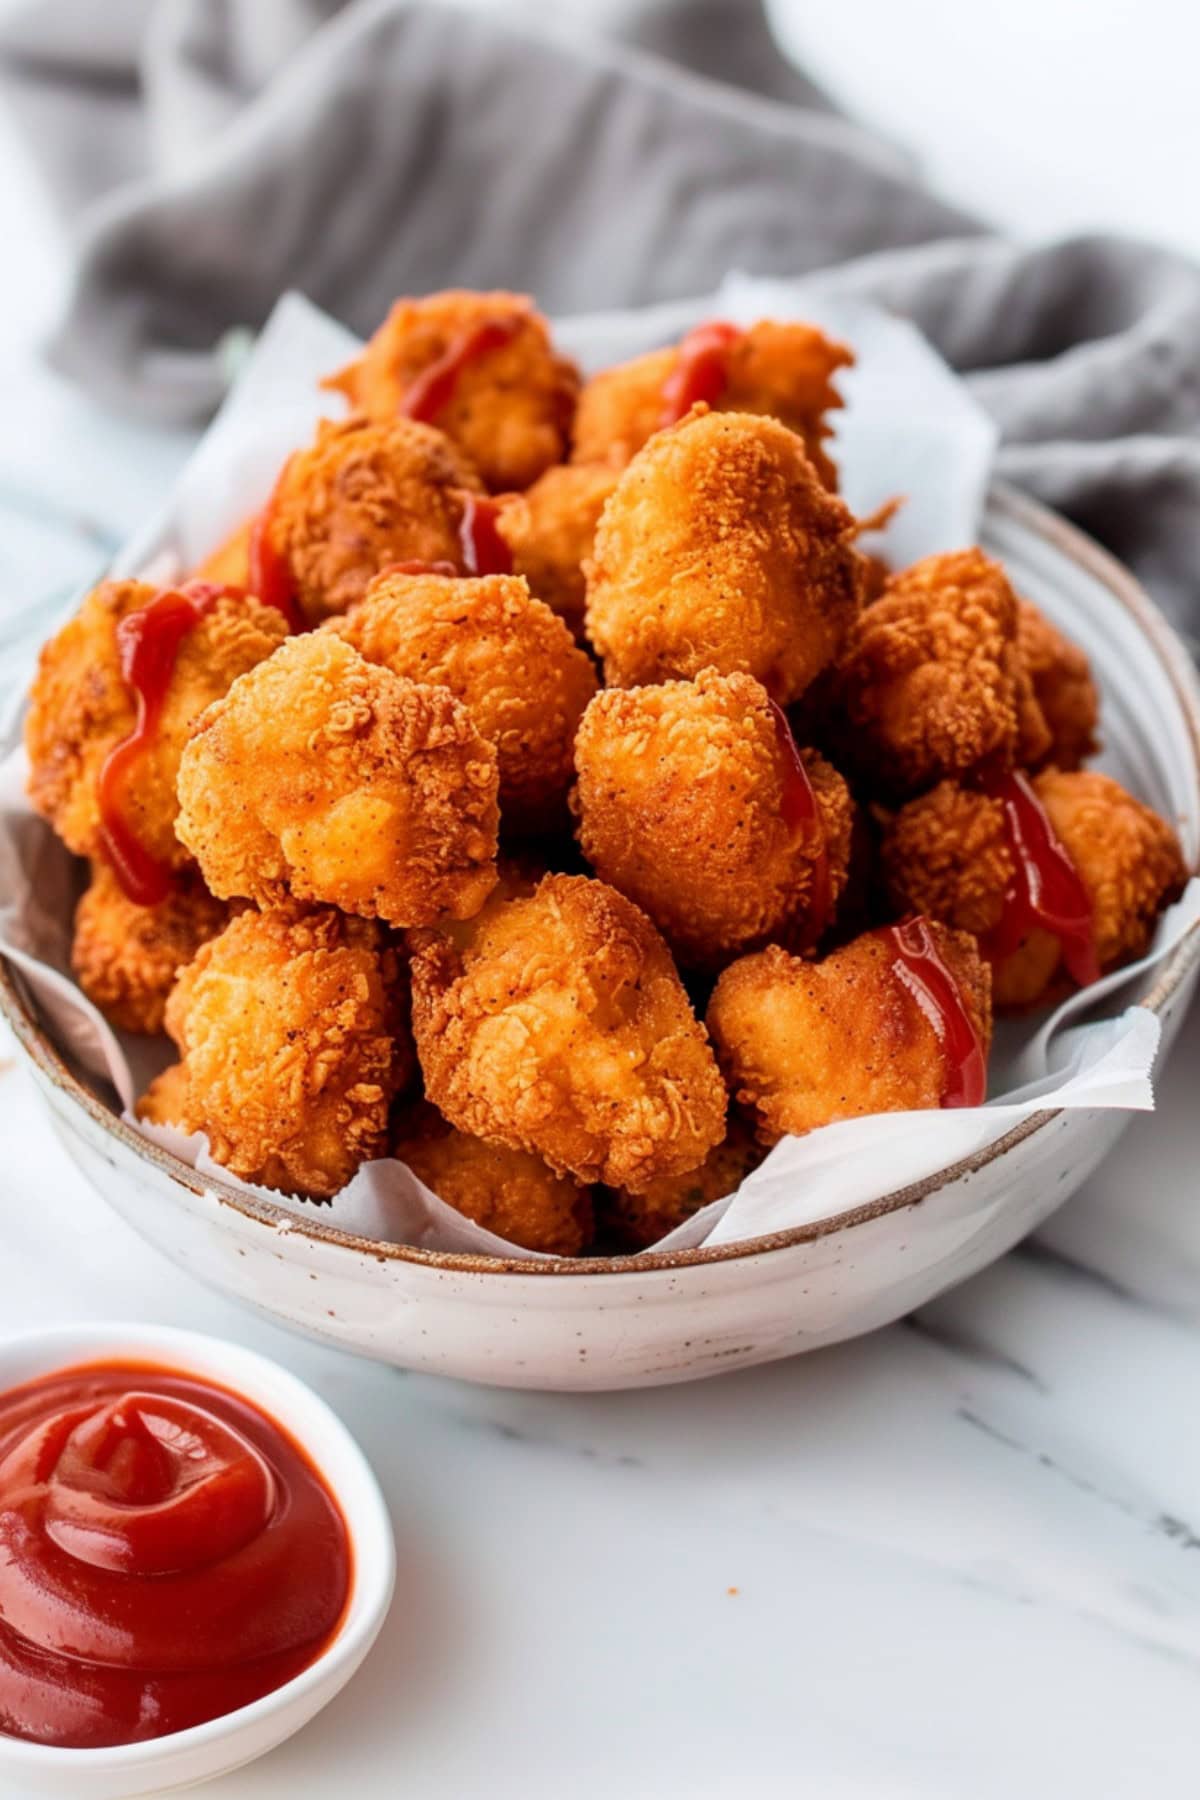 Homemade popcorn chicken served with ketchup